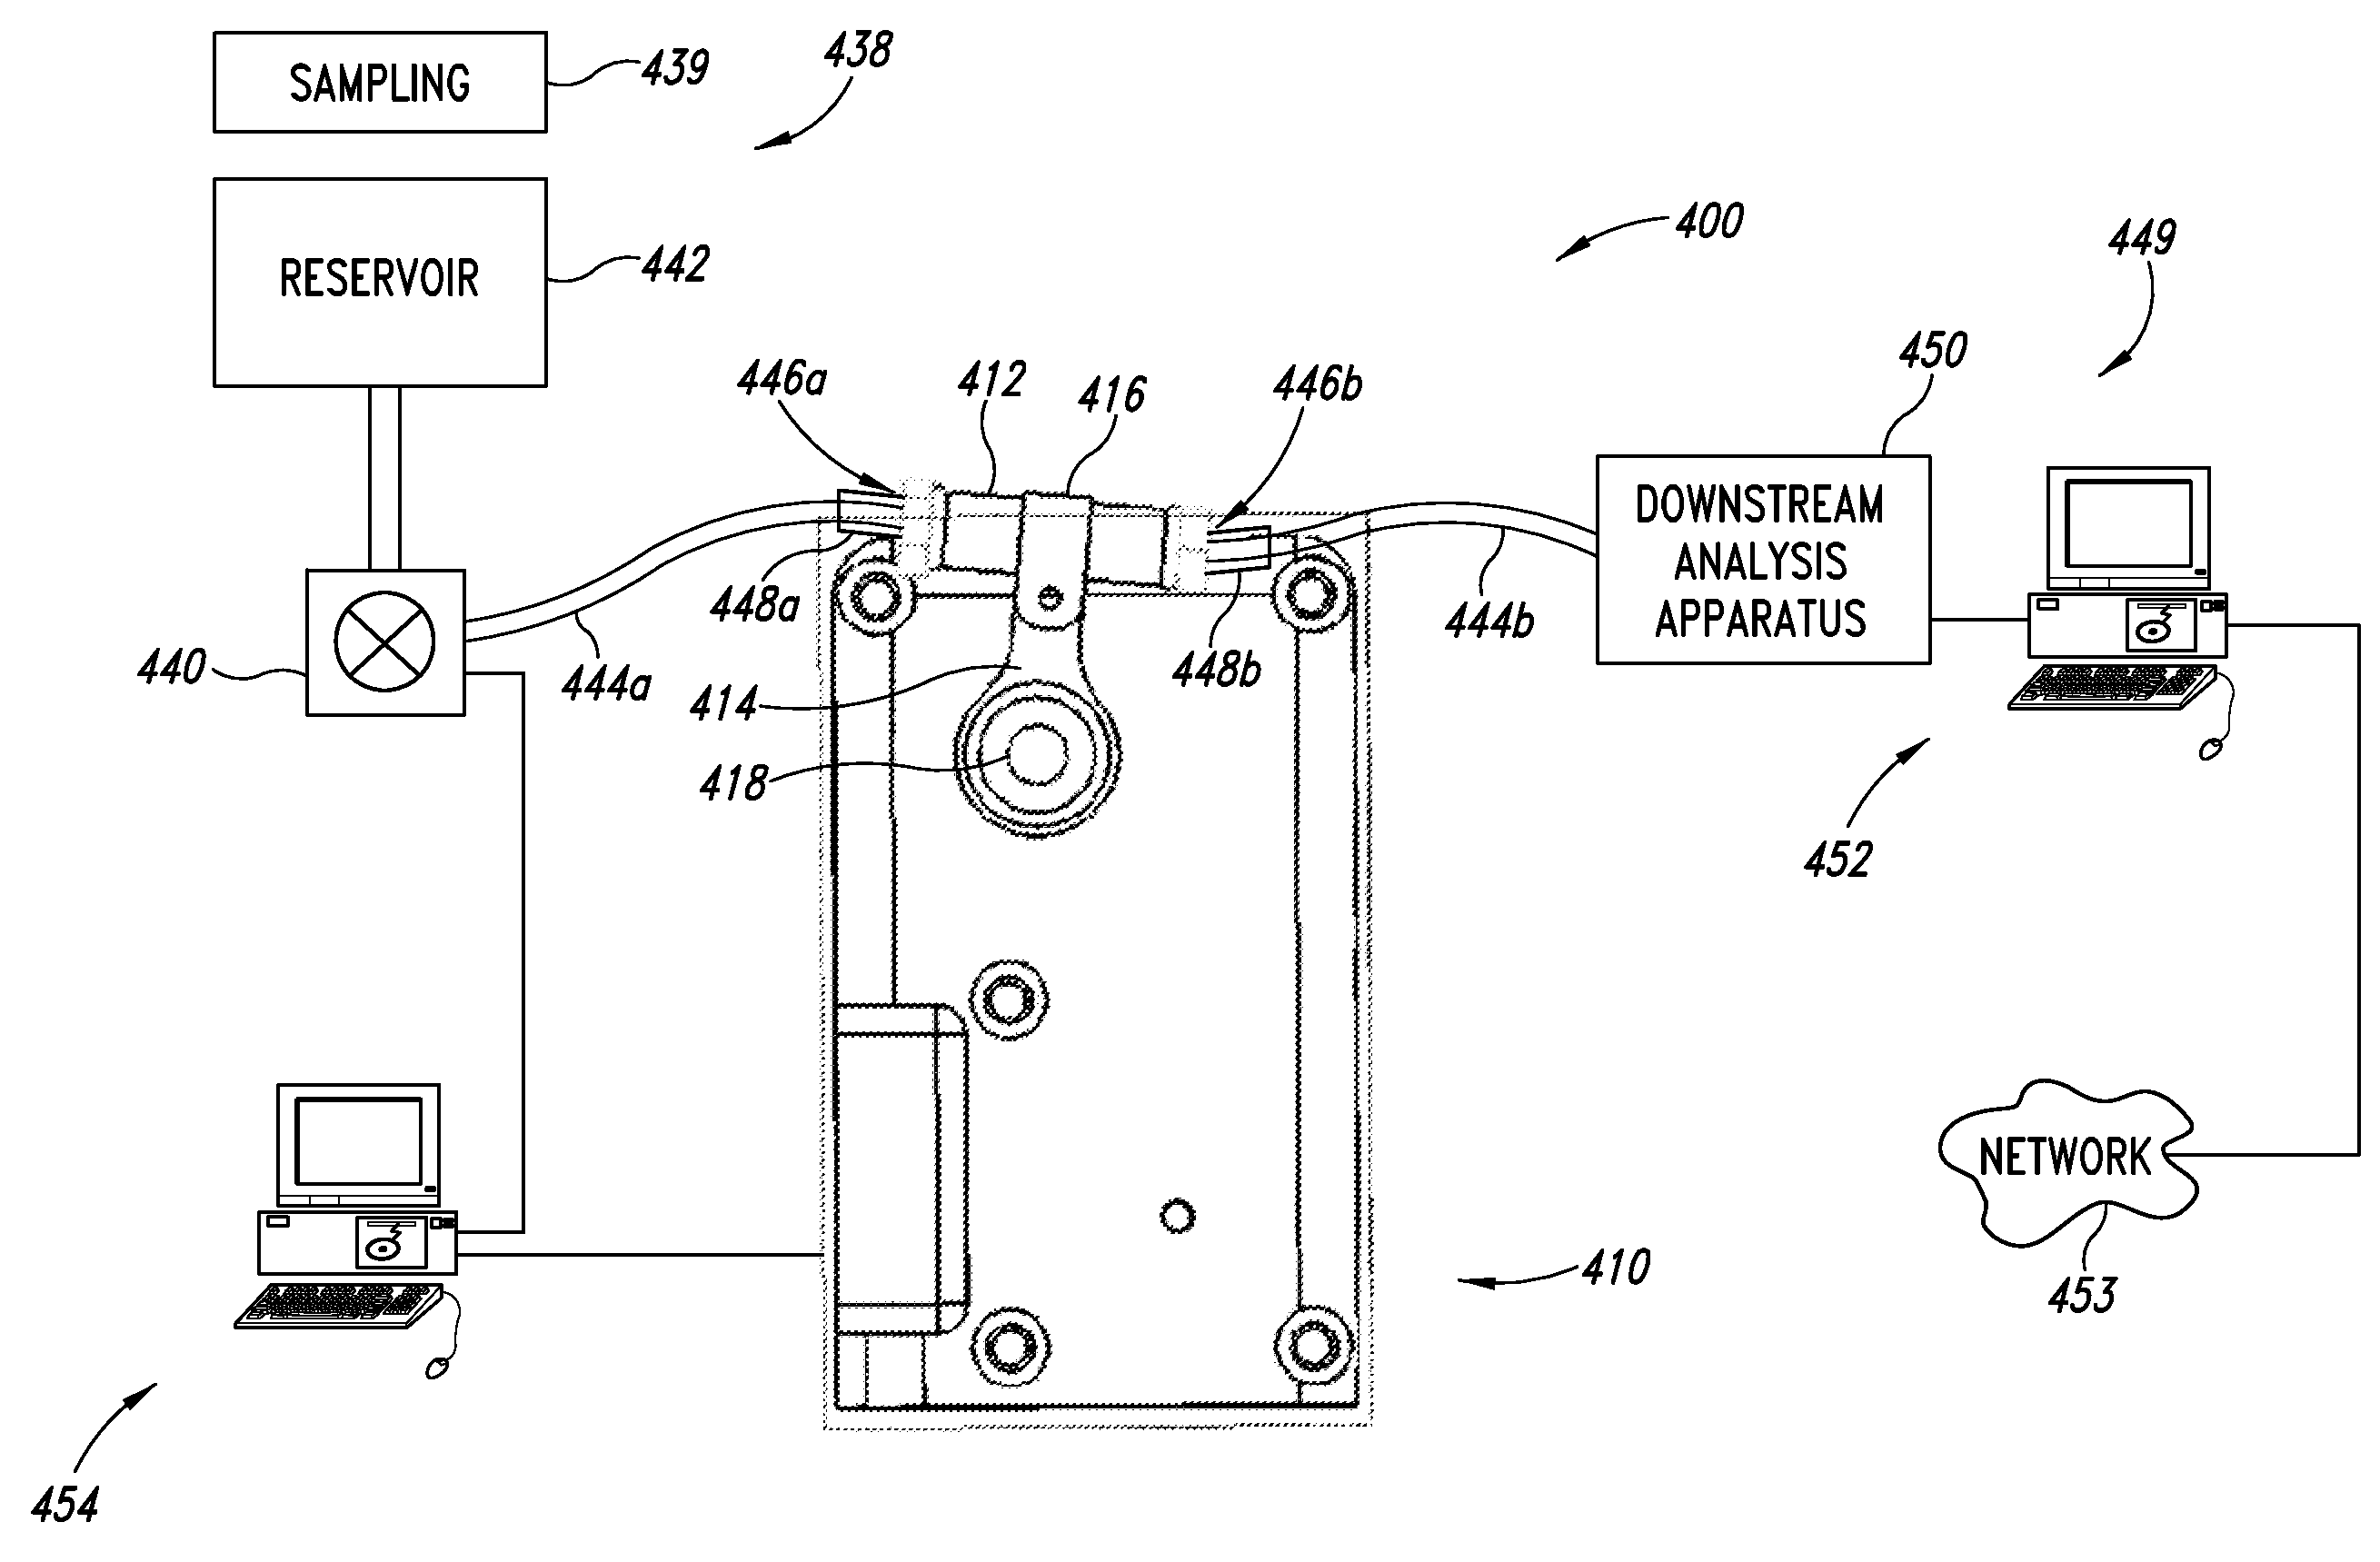 System, apparatus and method for material preparation and/or handling